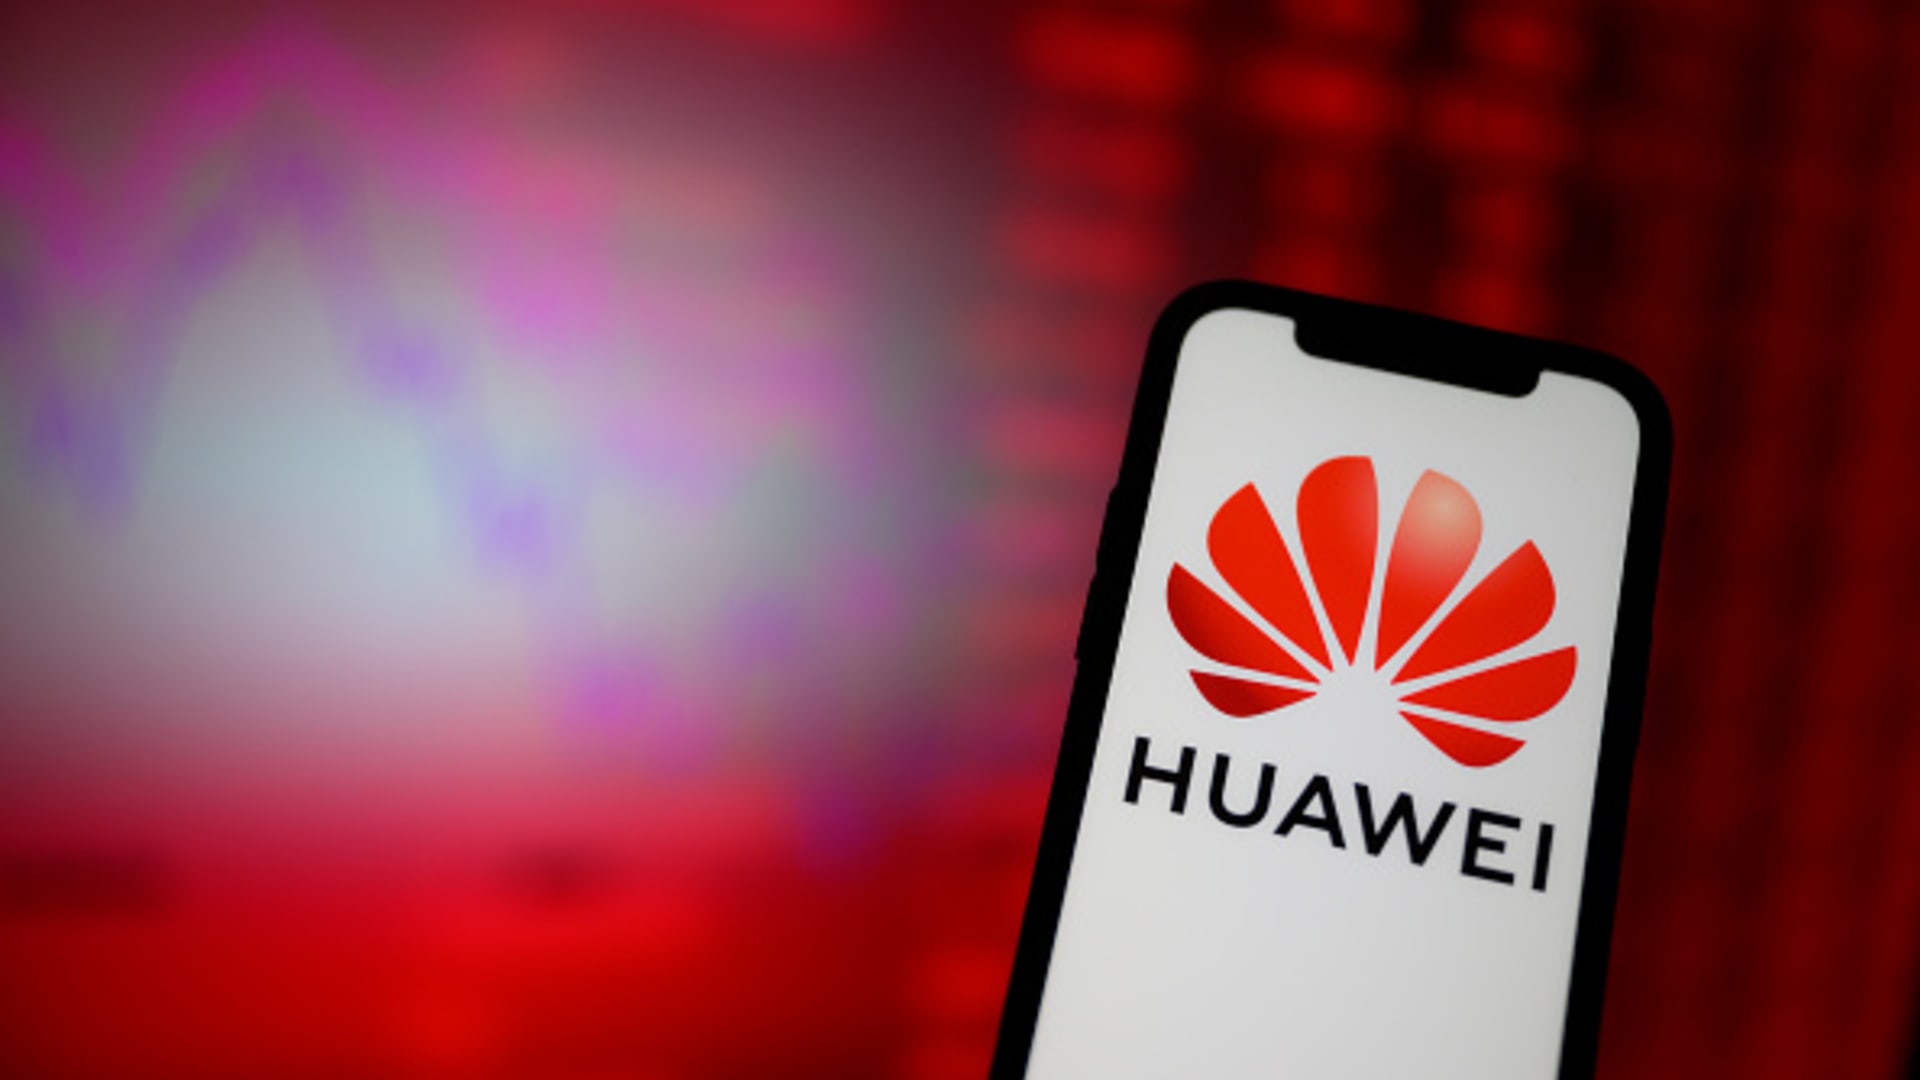 China's chip industry will be 'reborn' under U.S. sanctions, Huawei says, confirming breakthrough